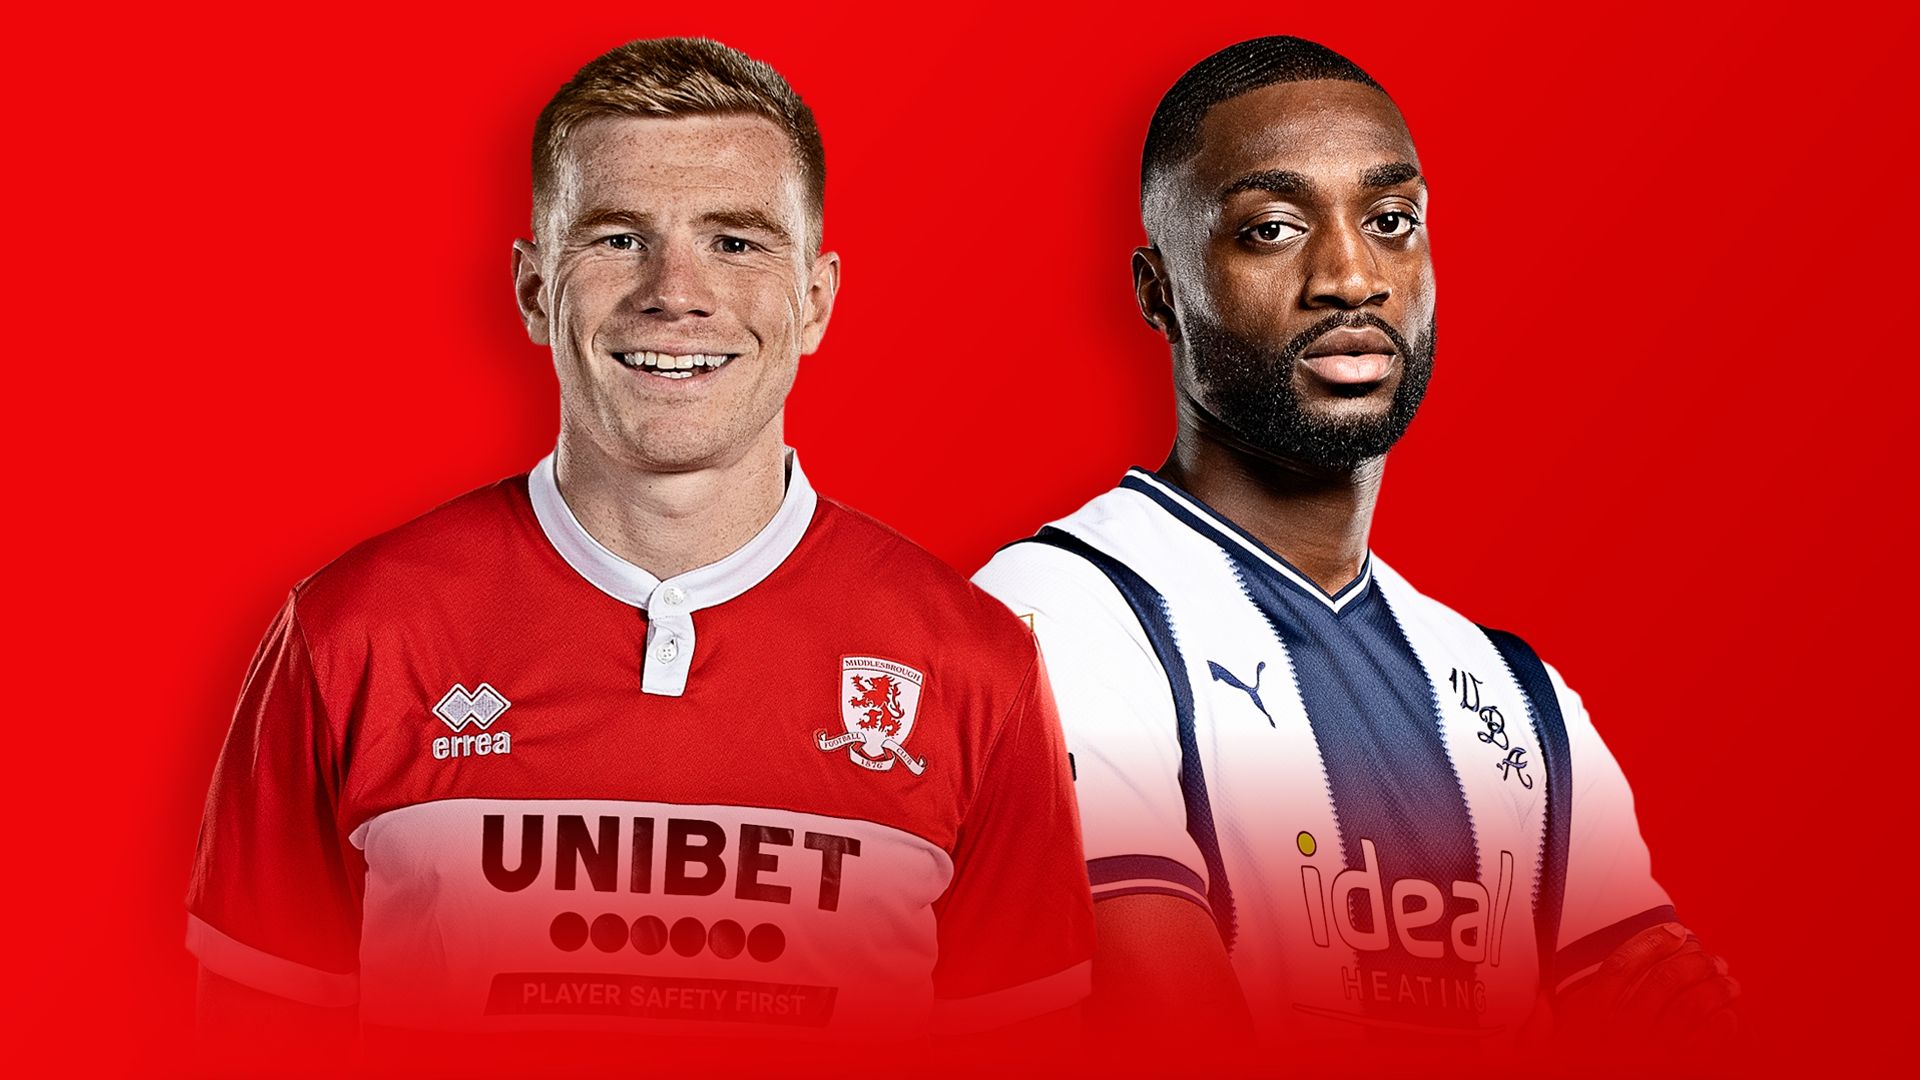 Middlesbrough vs West Brom: Championship live on Sky Sports Football